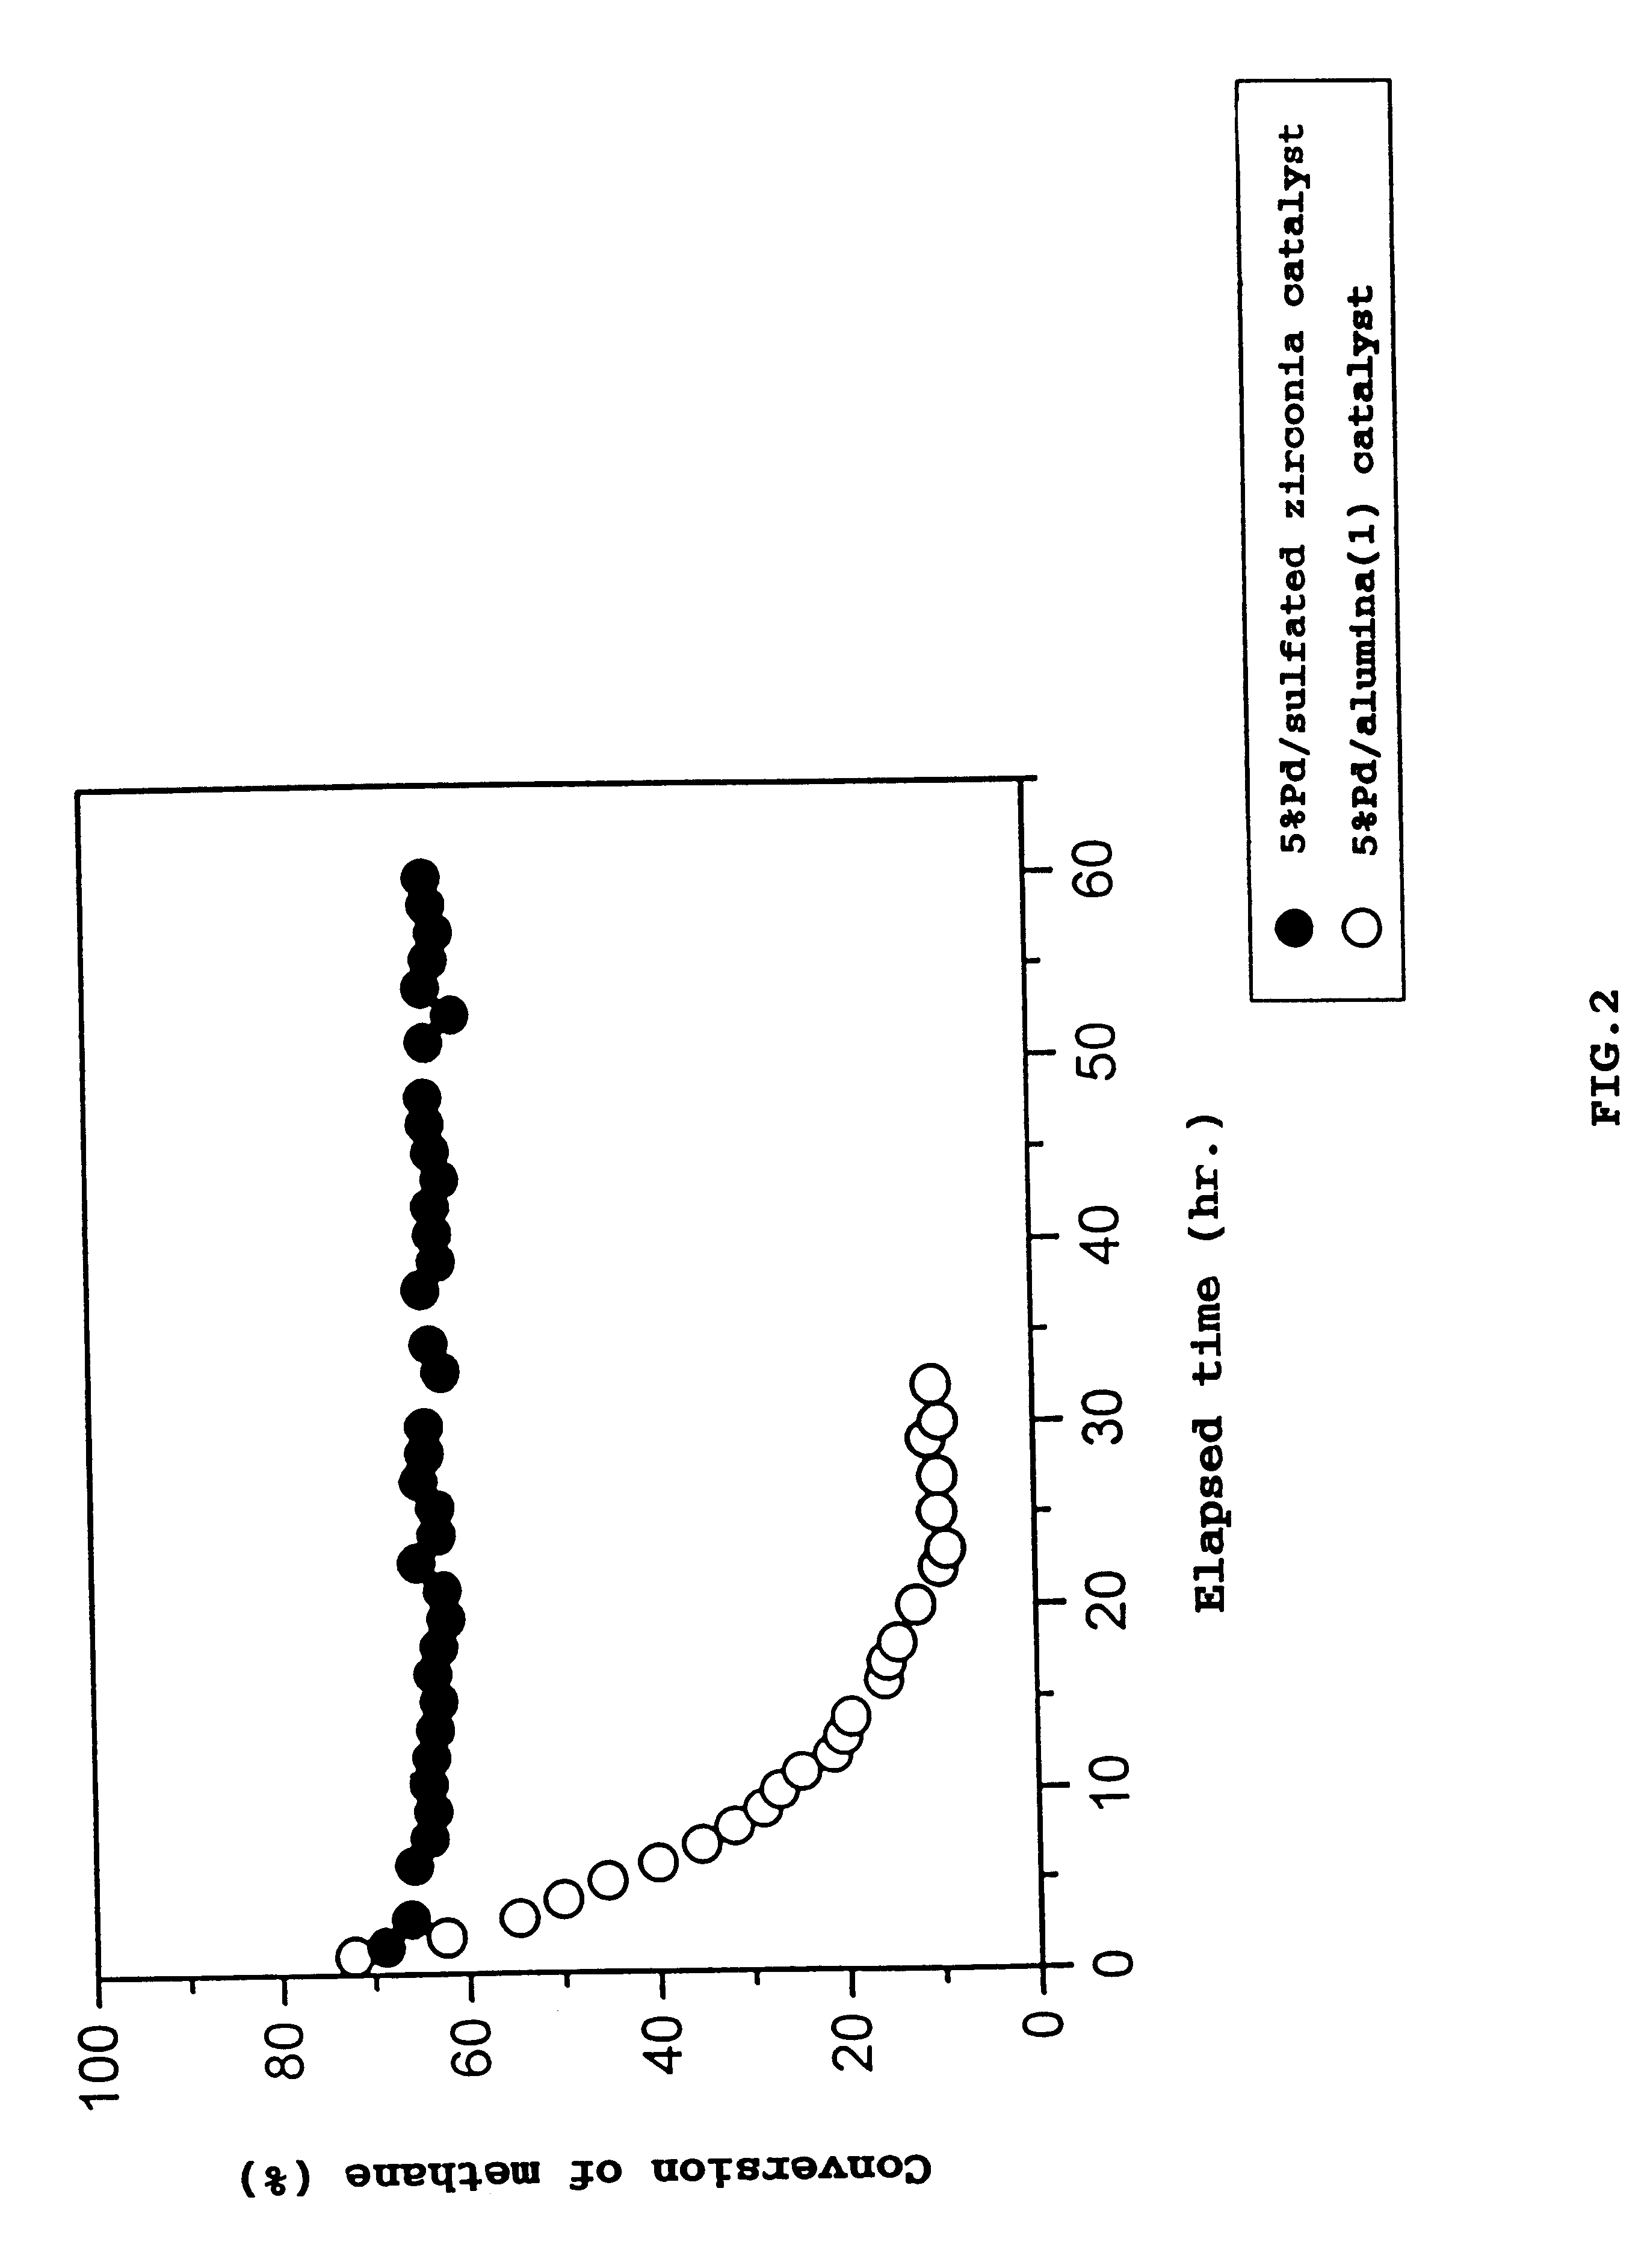 Catalyst for removing hydrocarbons from exhaust gas and method for clarification of exhaust gas